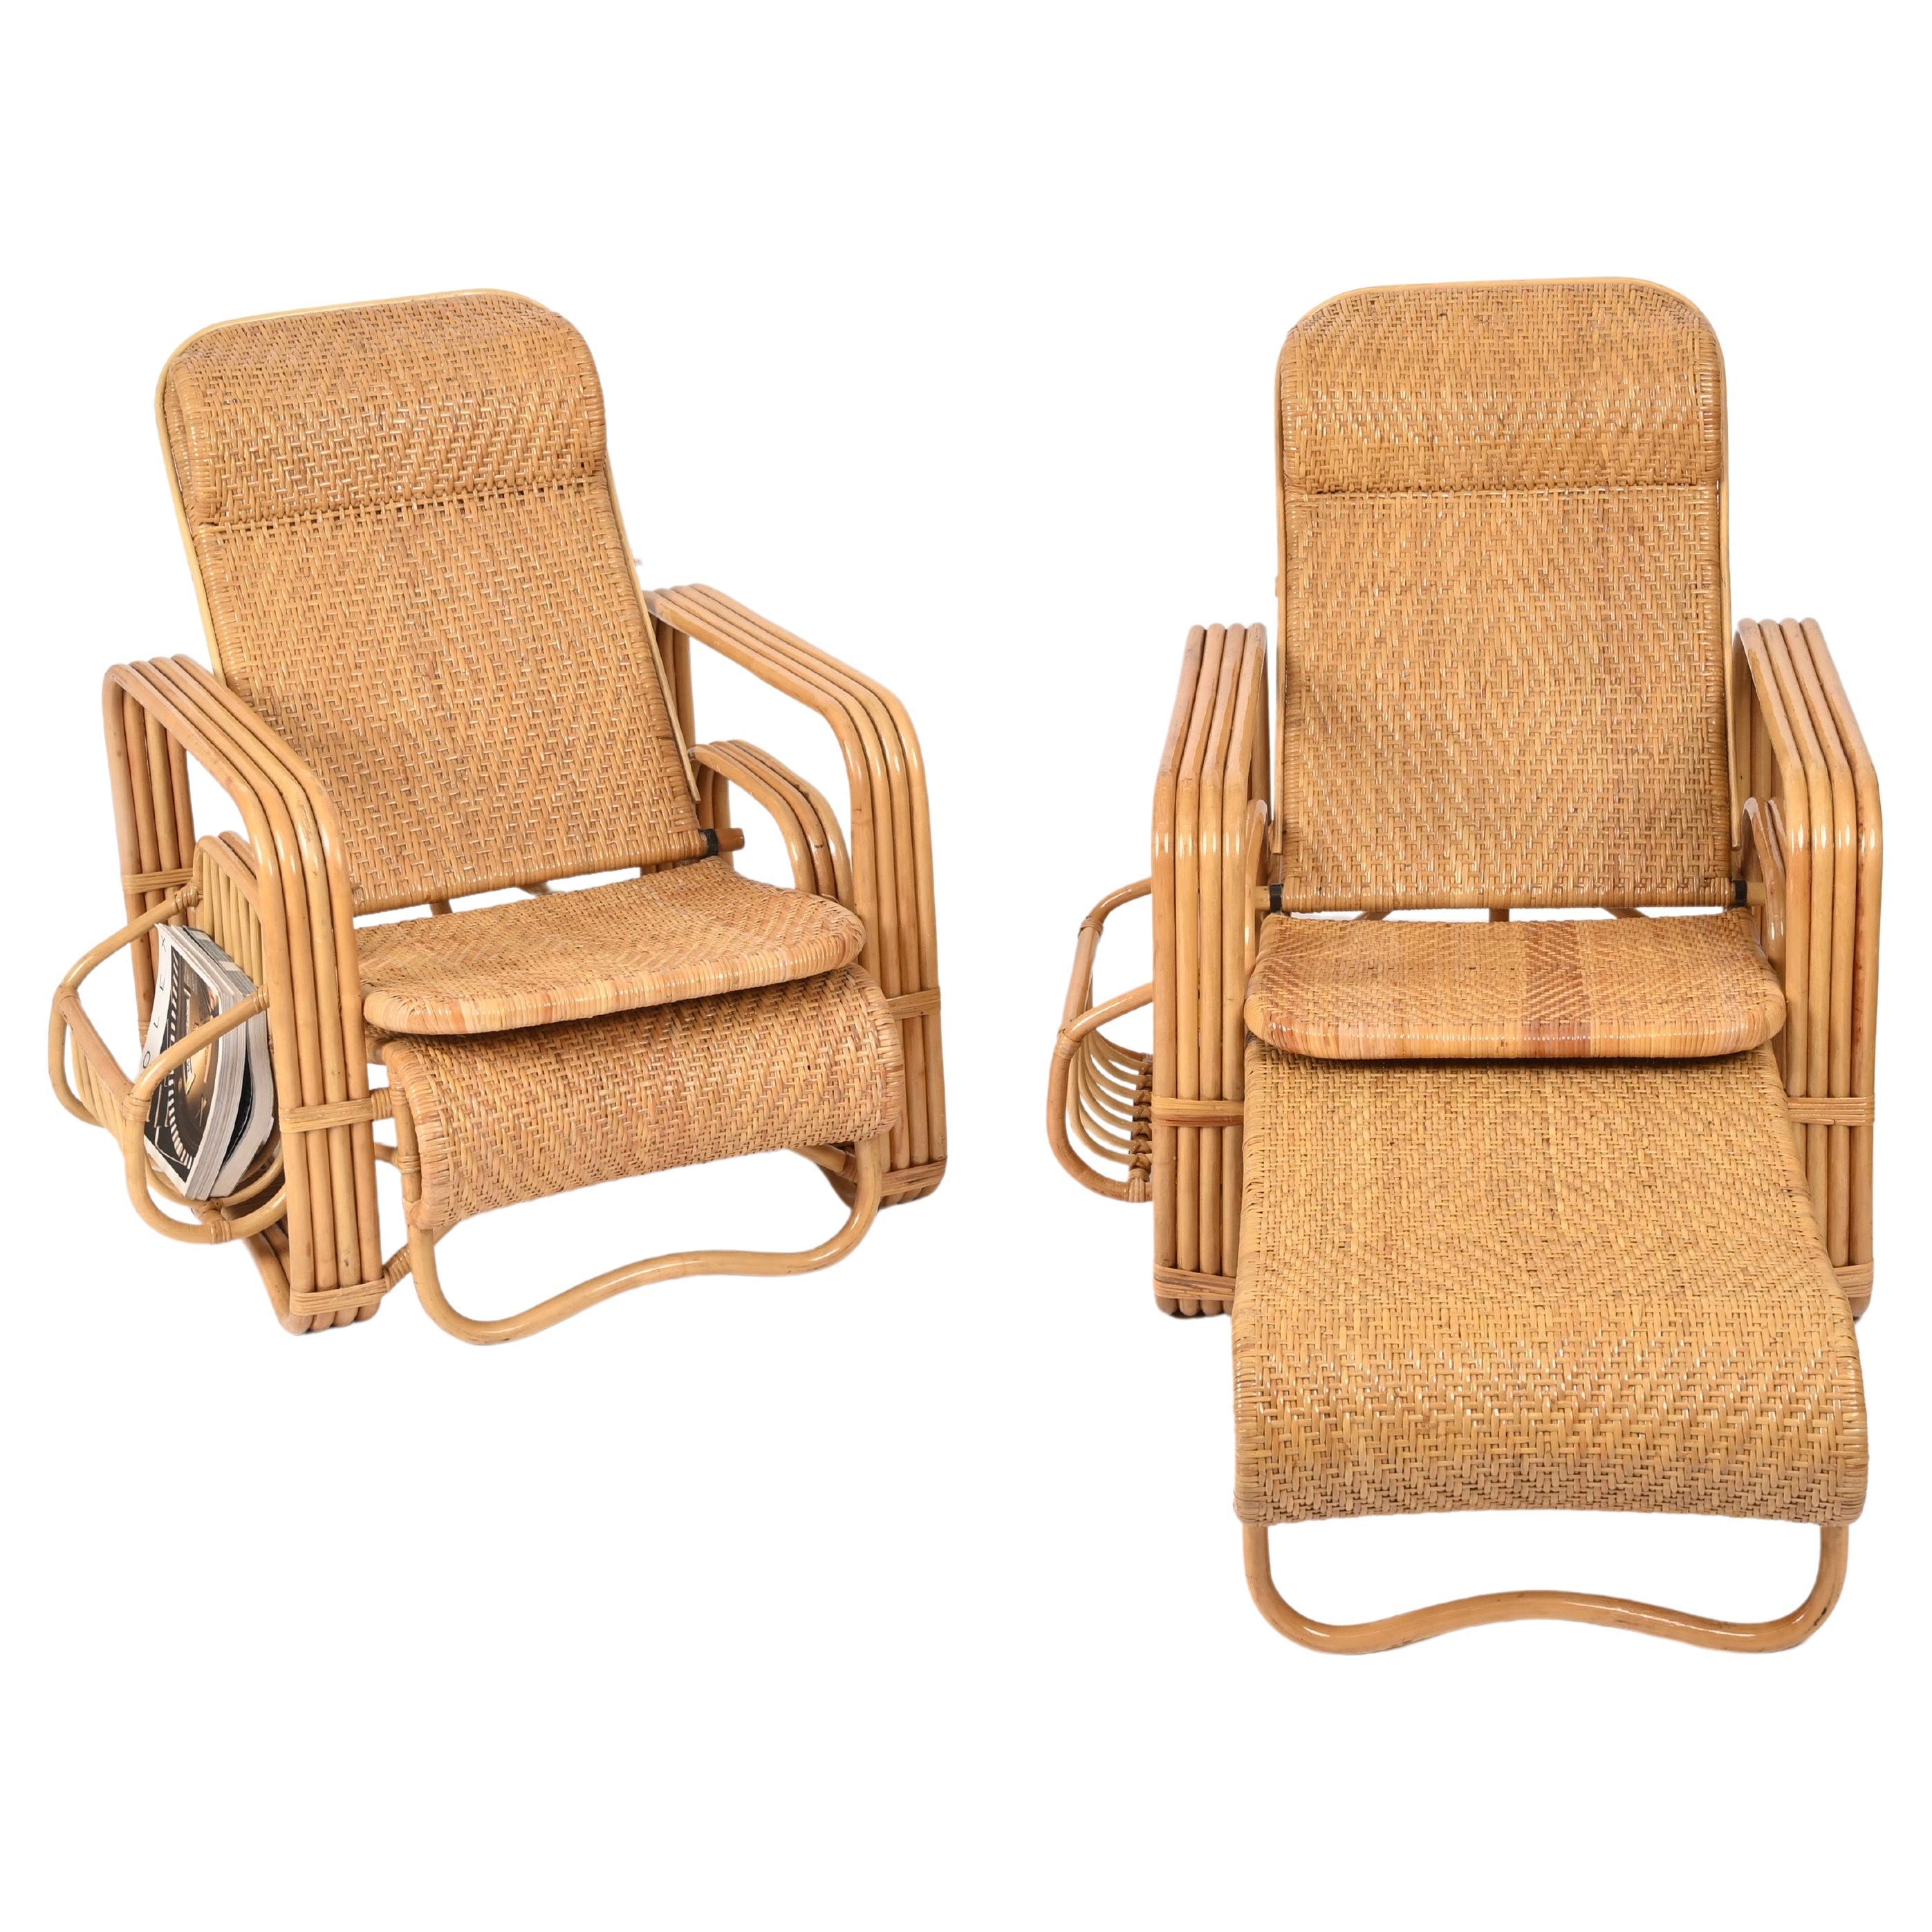 Spectacular pair of reclinable armchairs / lounge chairs fully made in curved bamboo, rattan and hand-woven wicker.  These gorgeous lounge chairs were produced in Italy during the 1970s and are attributed to the mastery of Vivai del Sud.

These